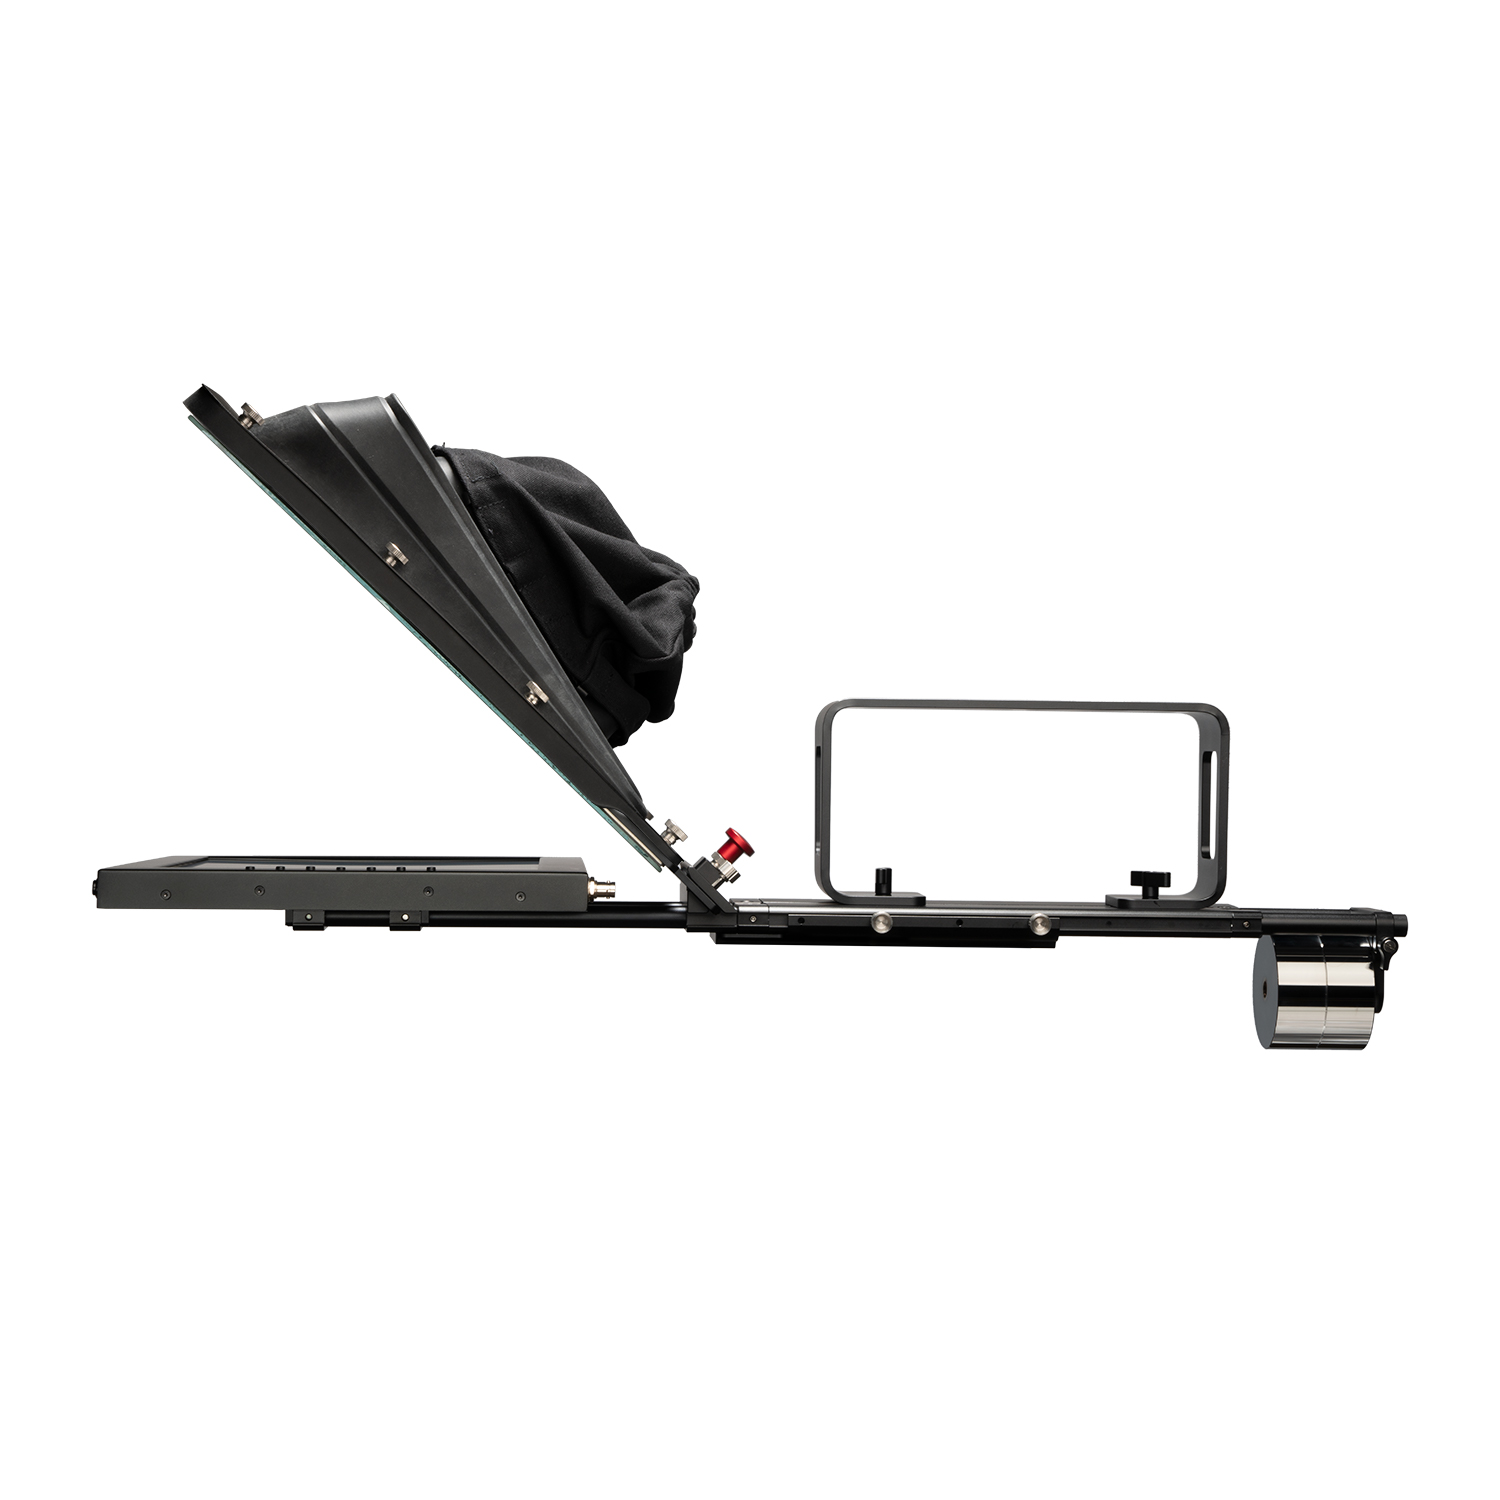 ikan Professional High-Bright Teleprompter with Talent Monitor Kit (17")